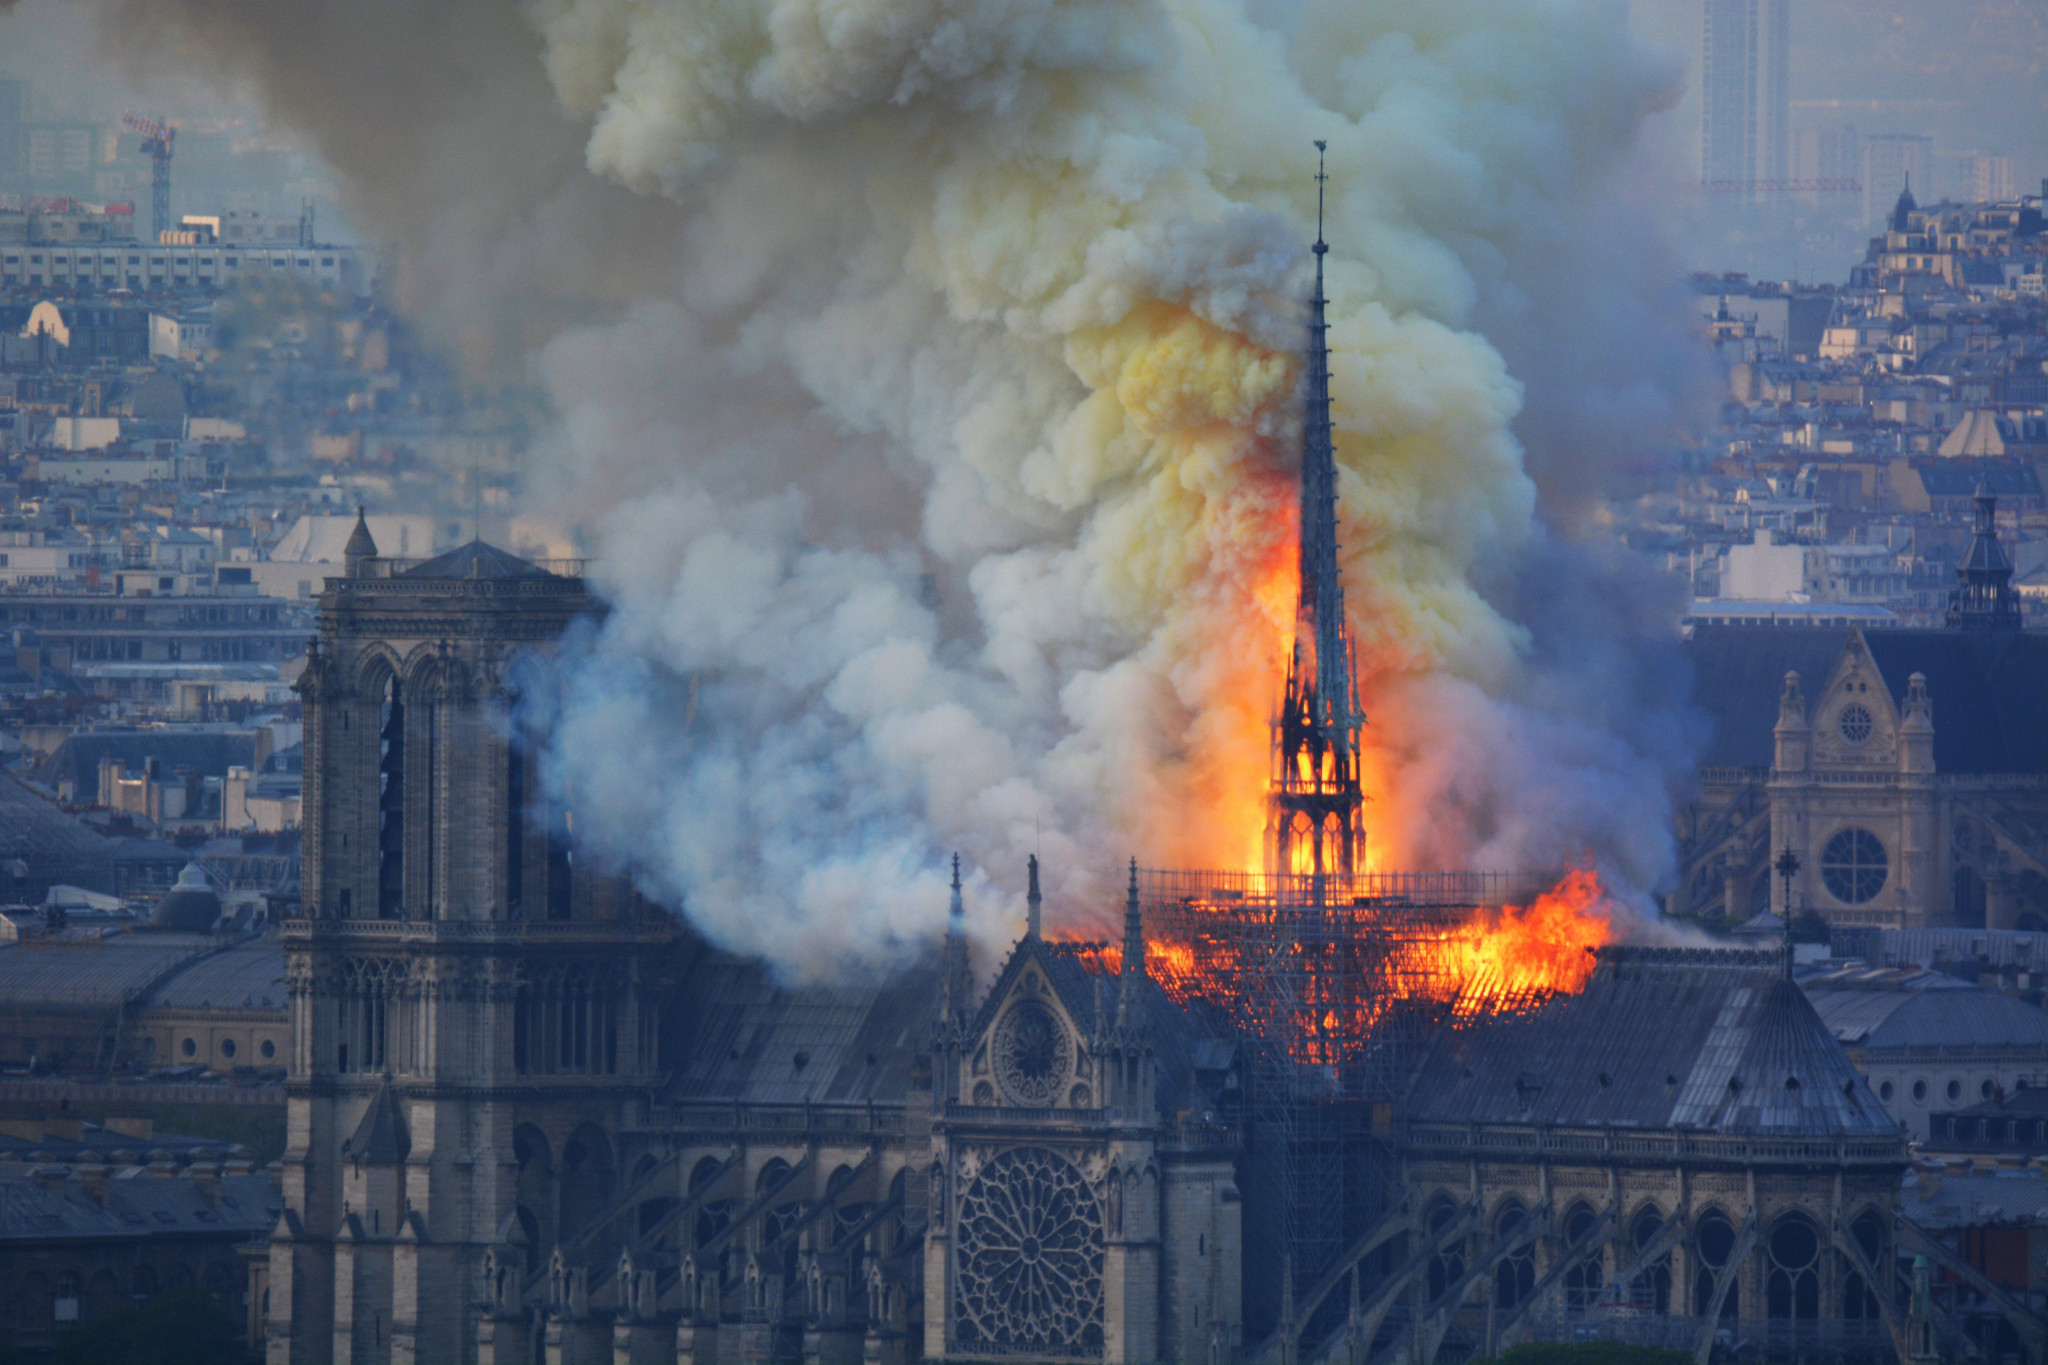 A fire broke out on the famous Notre-Dame cathedral in 2019 ©Getty Images